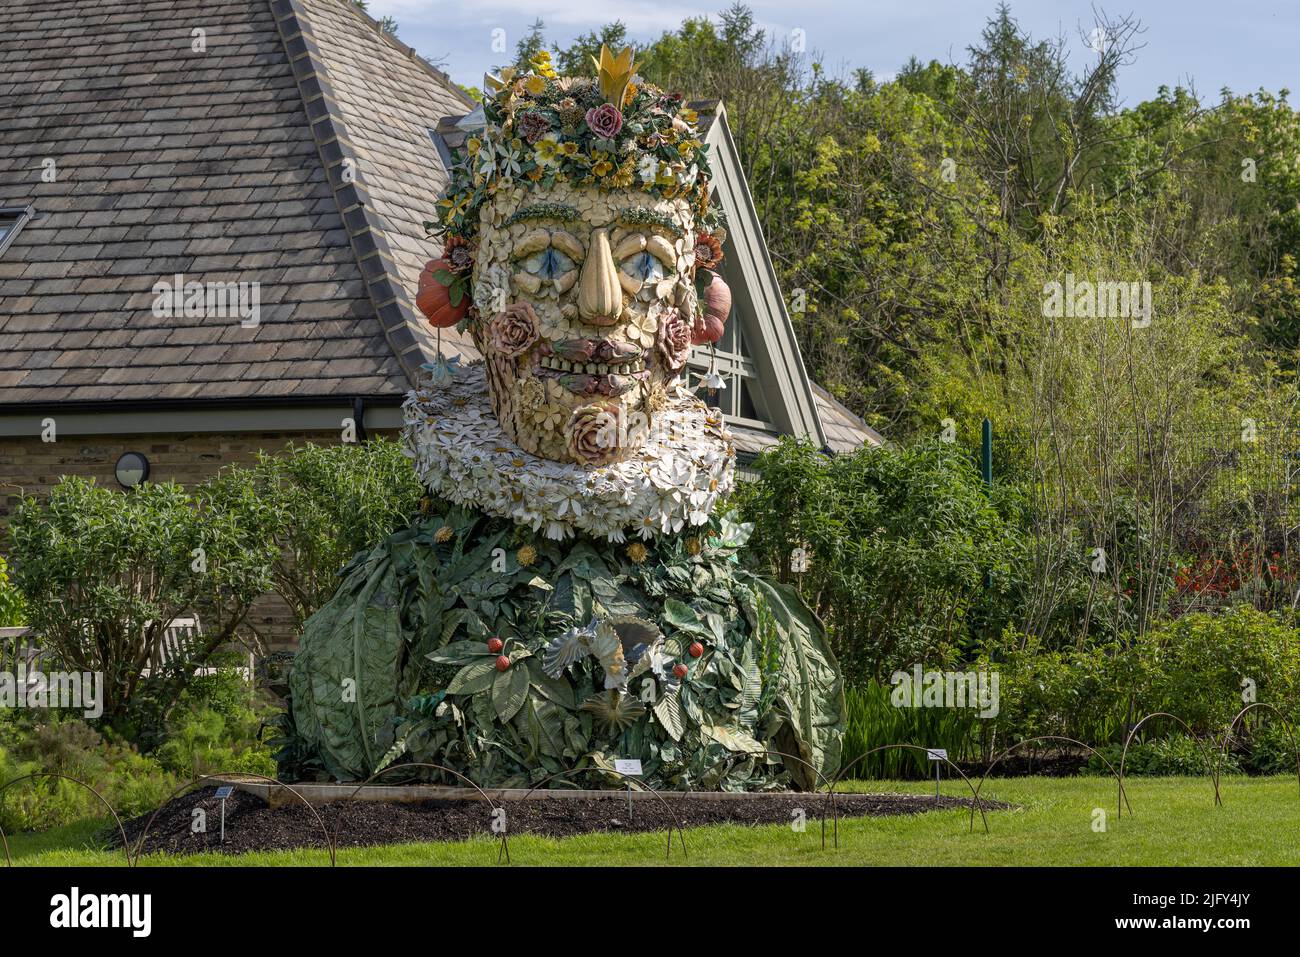 Four Seasons sculptures by American artist Philip Haas called changing season. A collection of seasonal vegetables at RHS Royal horticultural society. Stock Photo